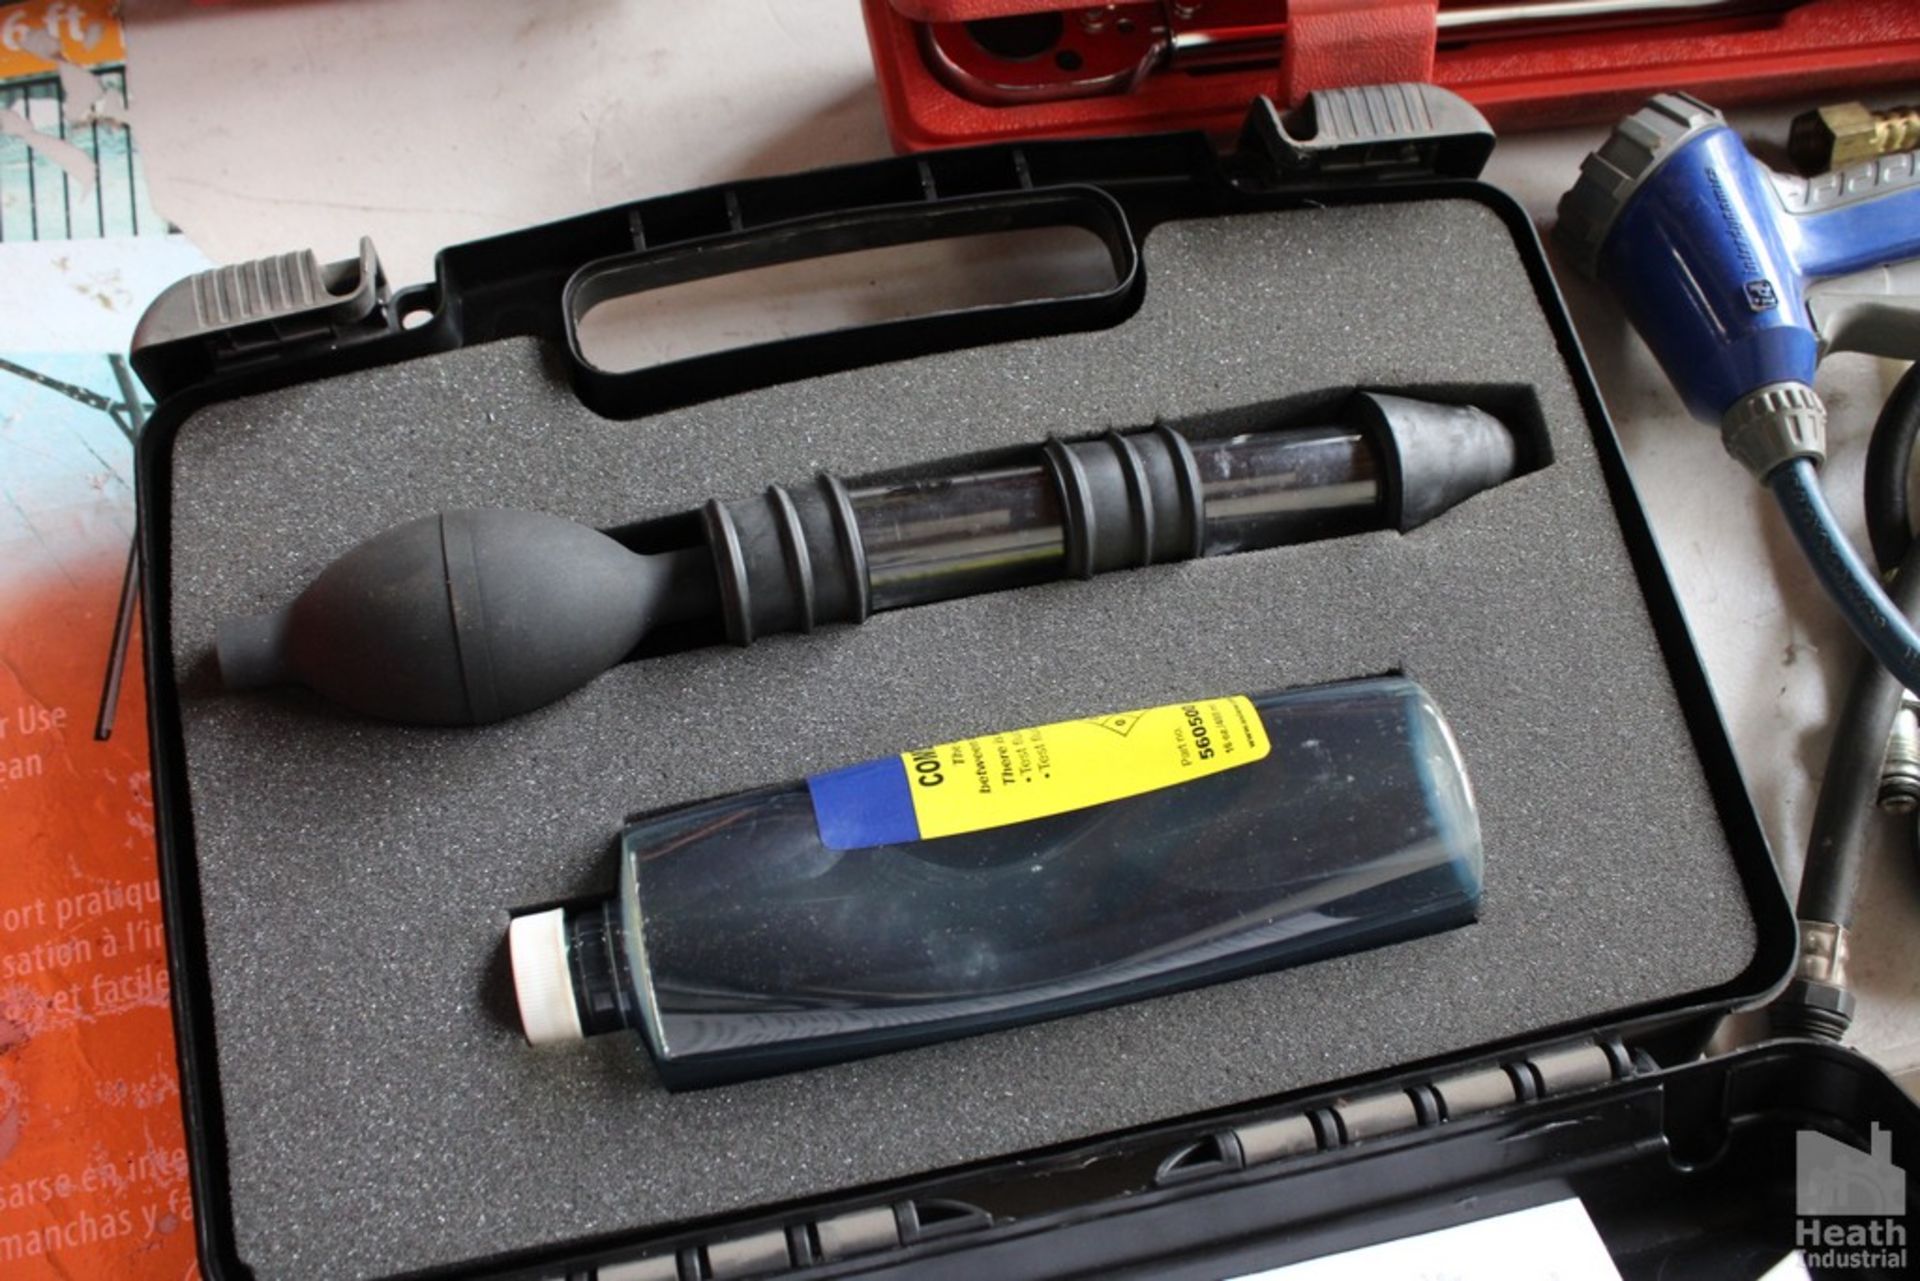 UVIEW MODEL 560000 COMBUSTION LEAK TESTER - Image 2 of 2